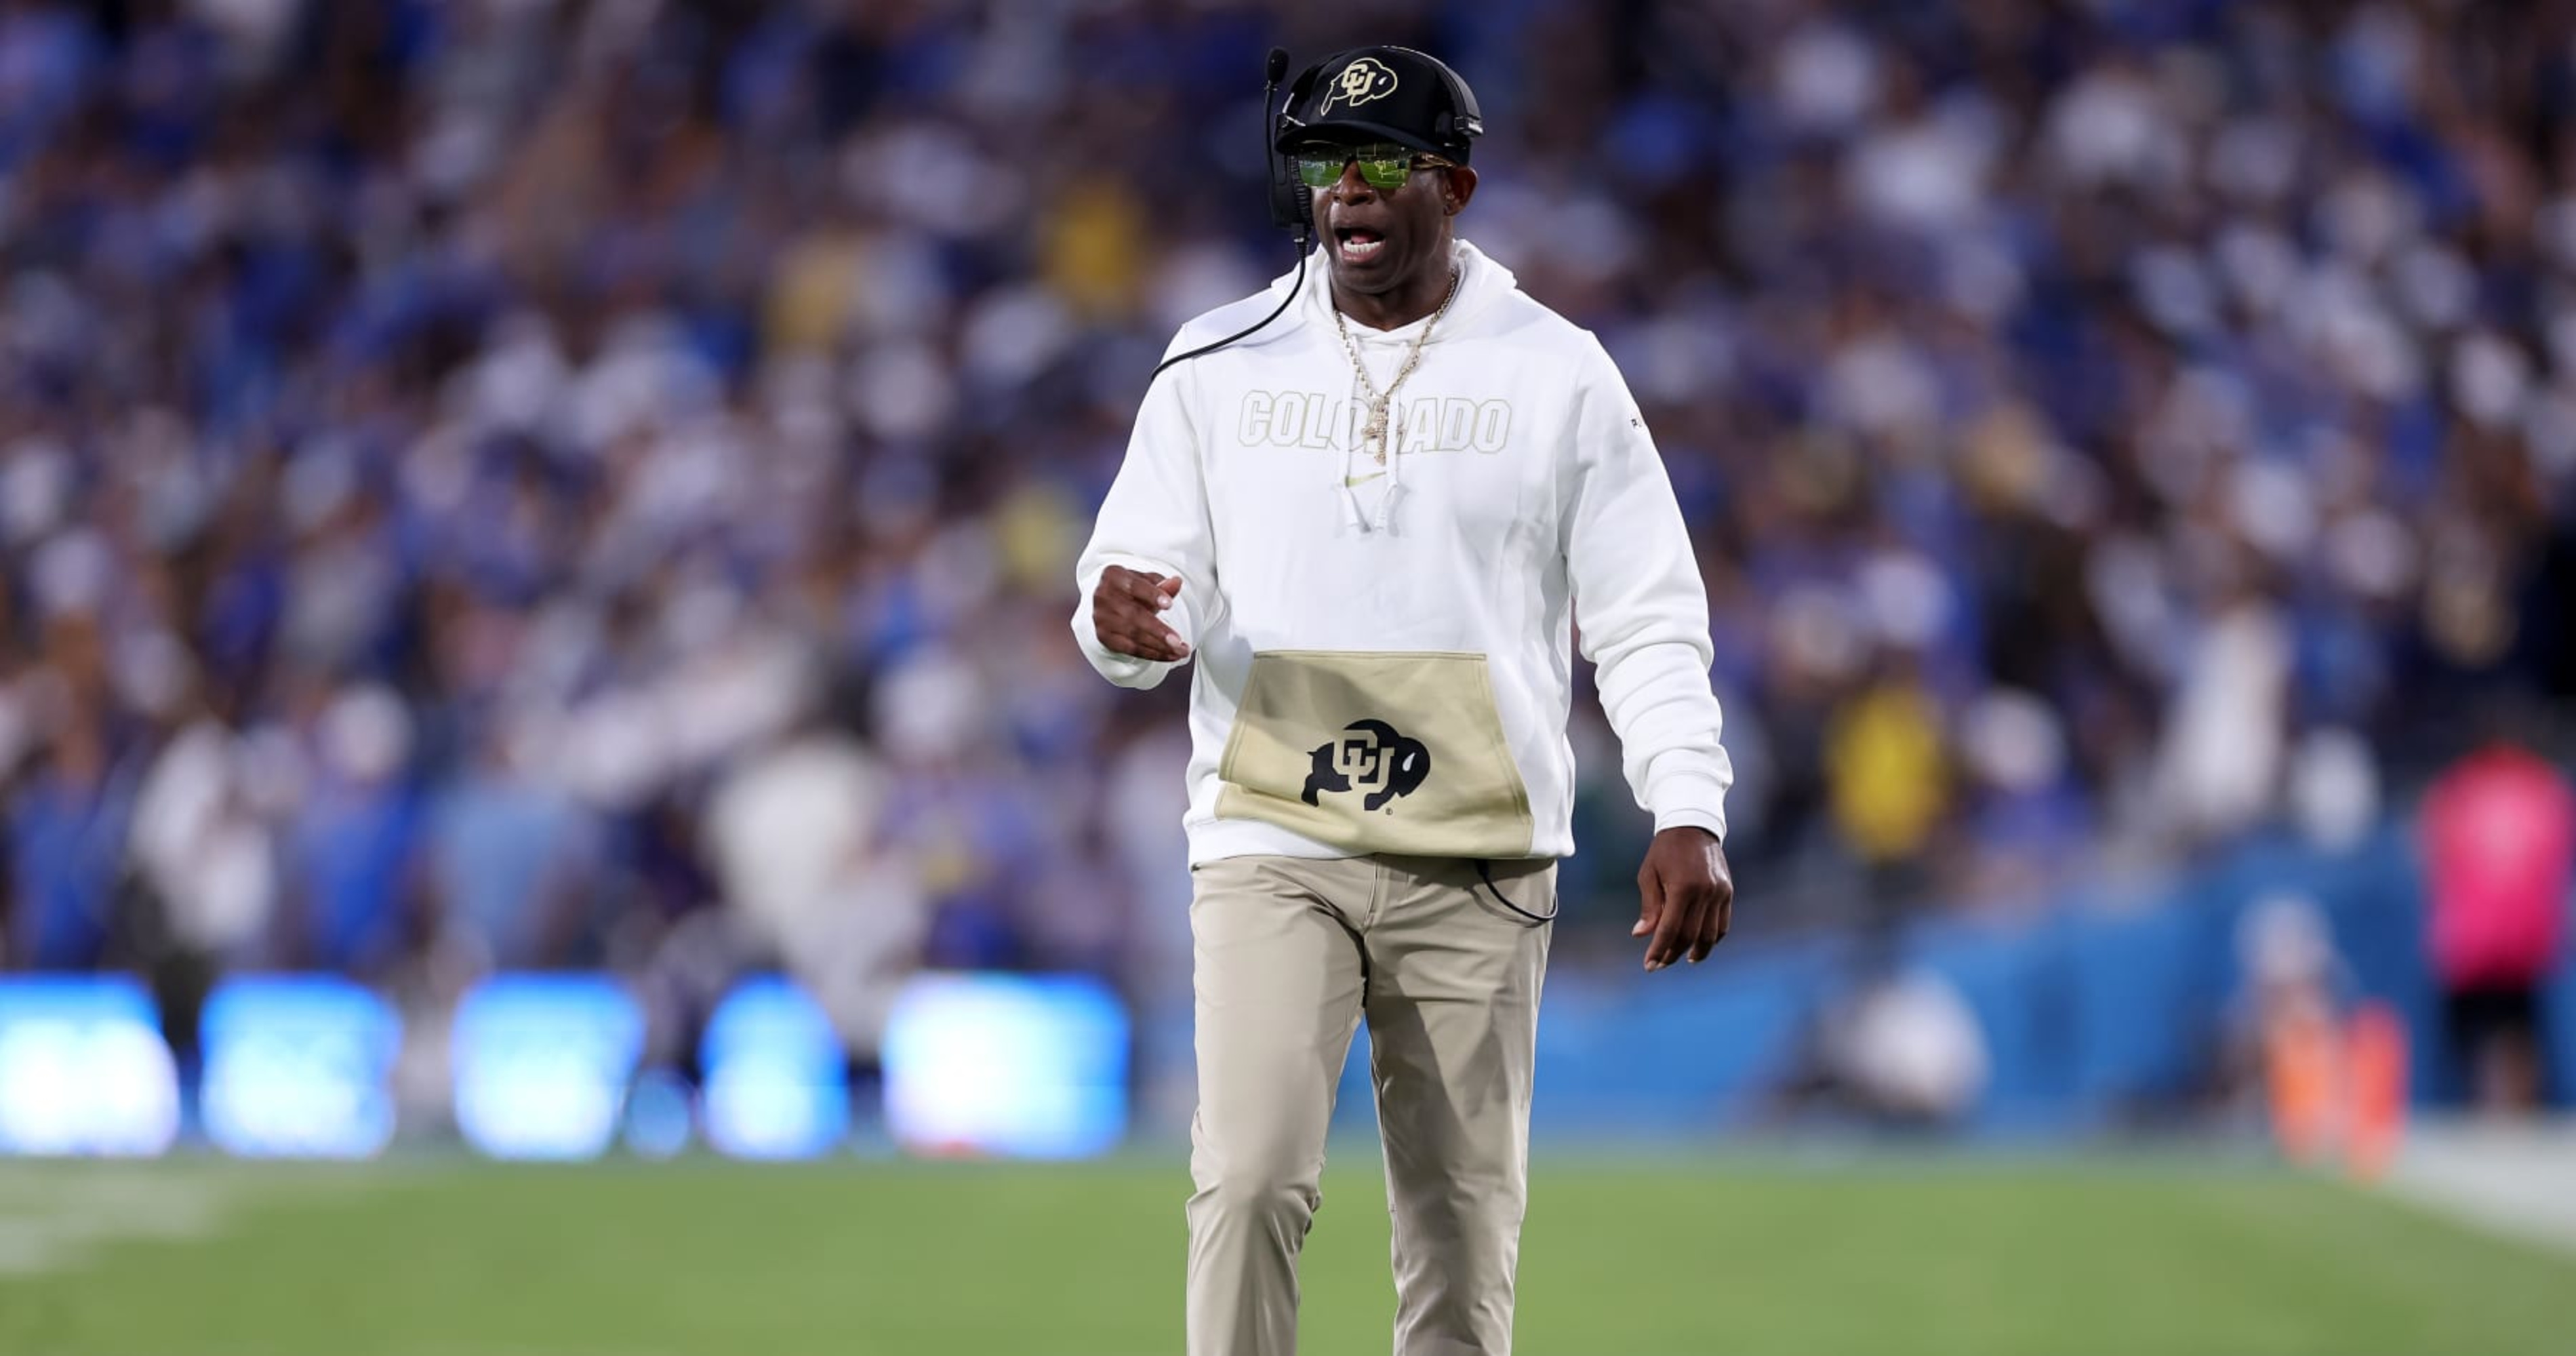 Deion Sanders: 'I Don't Give a Damn About No Bowl' Game, Colorado 'Trying to Win'